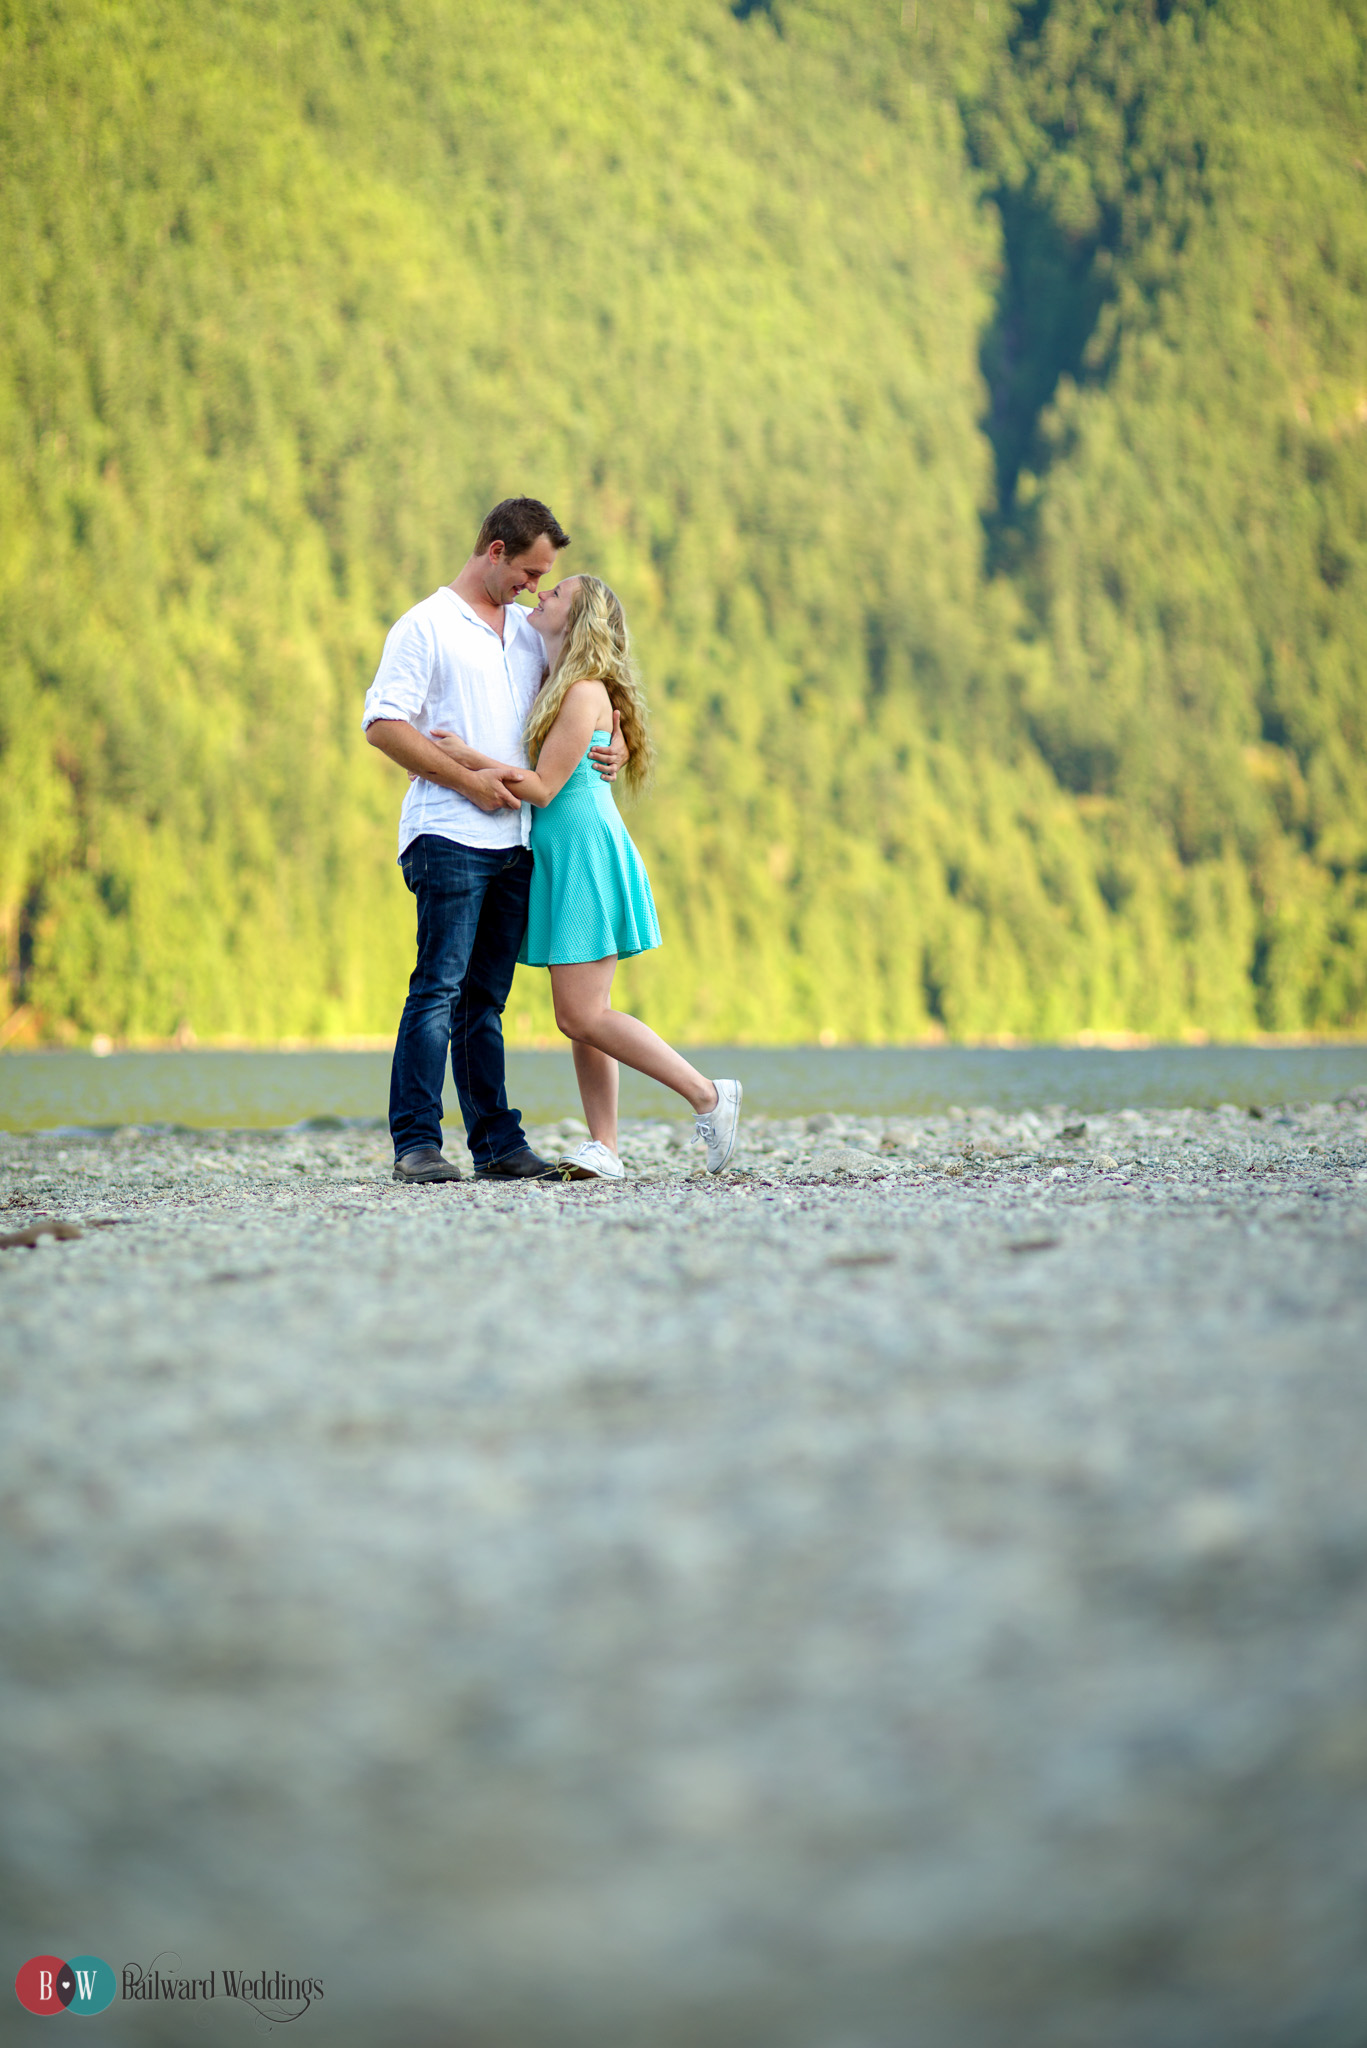 Jason and Marina Golden Ears Engagement Photography Session